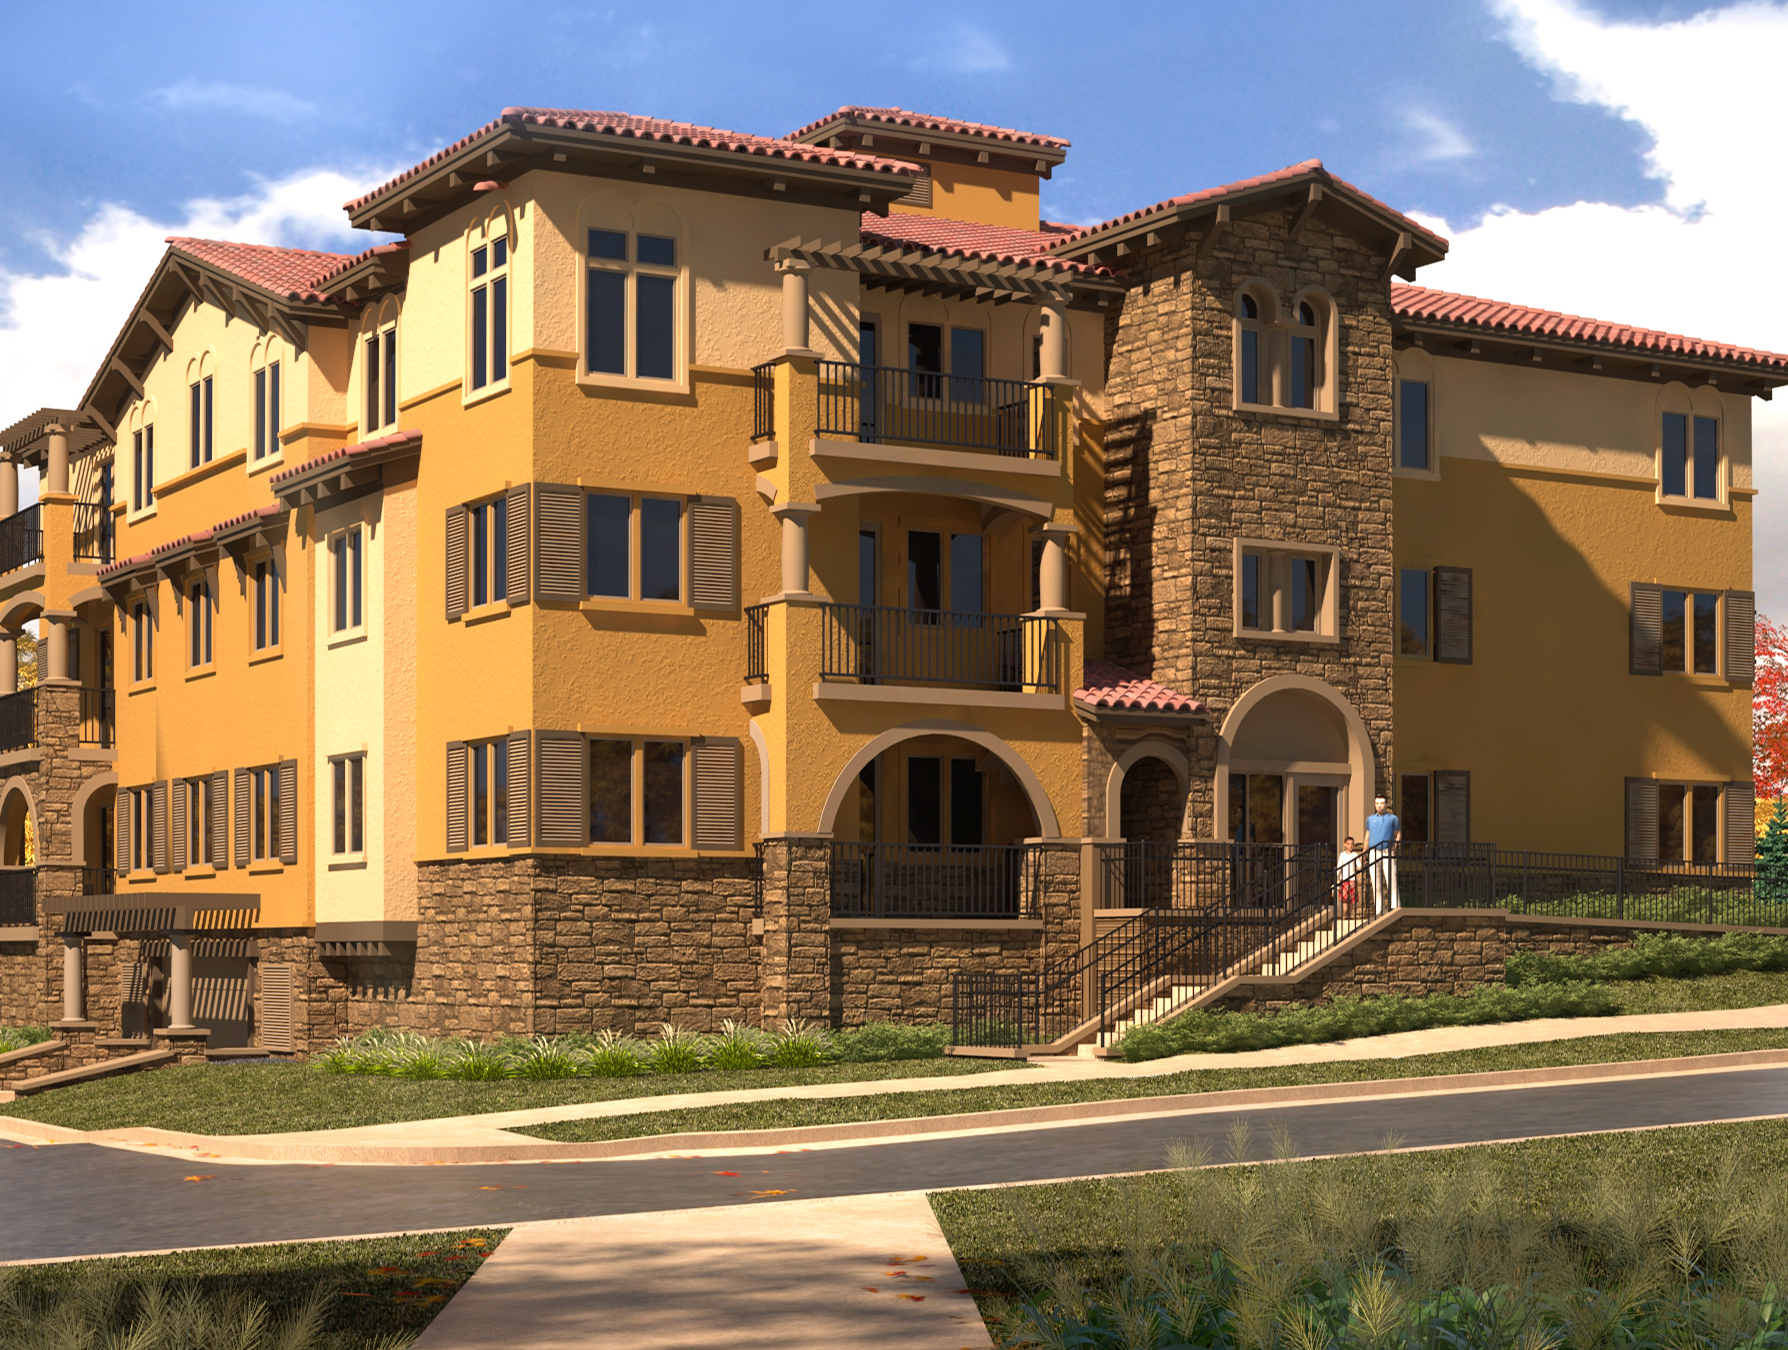 Housing architecture solution provided from an architecture firm located in Colorado